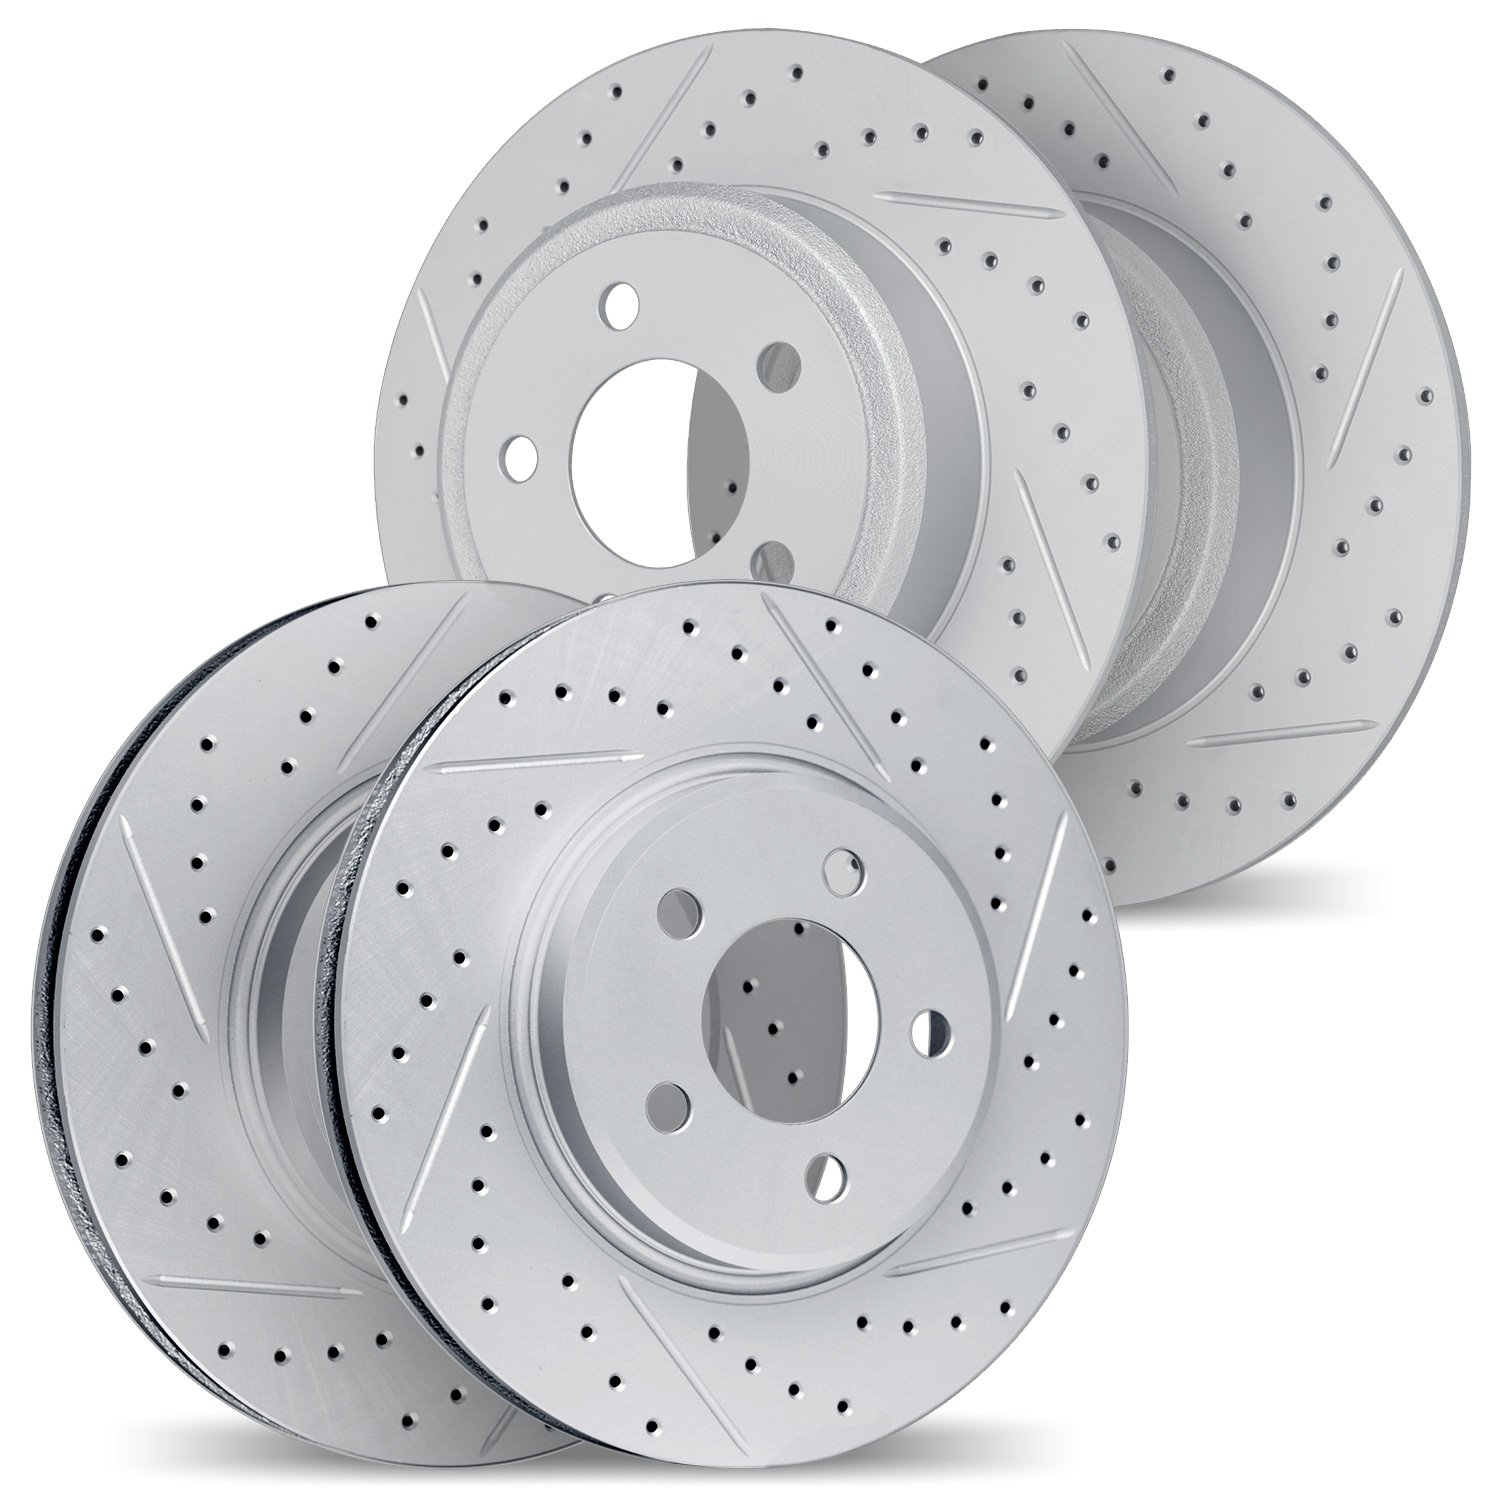 2004-47060 Geoperformance Drilled/Slotted Brake Rotors, 1999-2005 GM, Position: Front and Rear